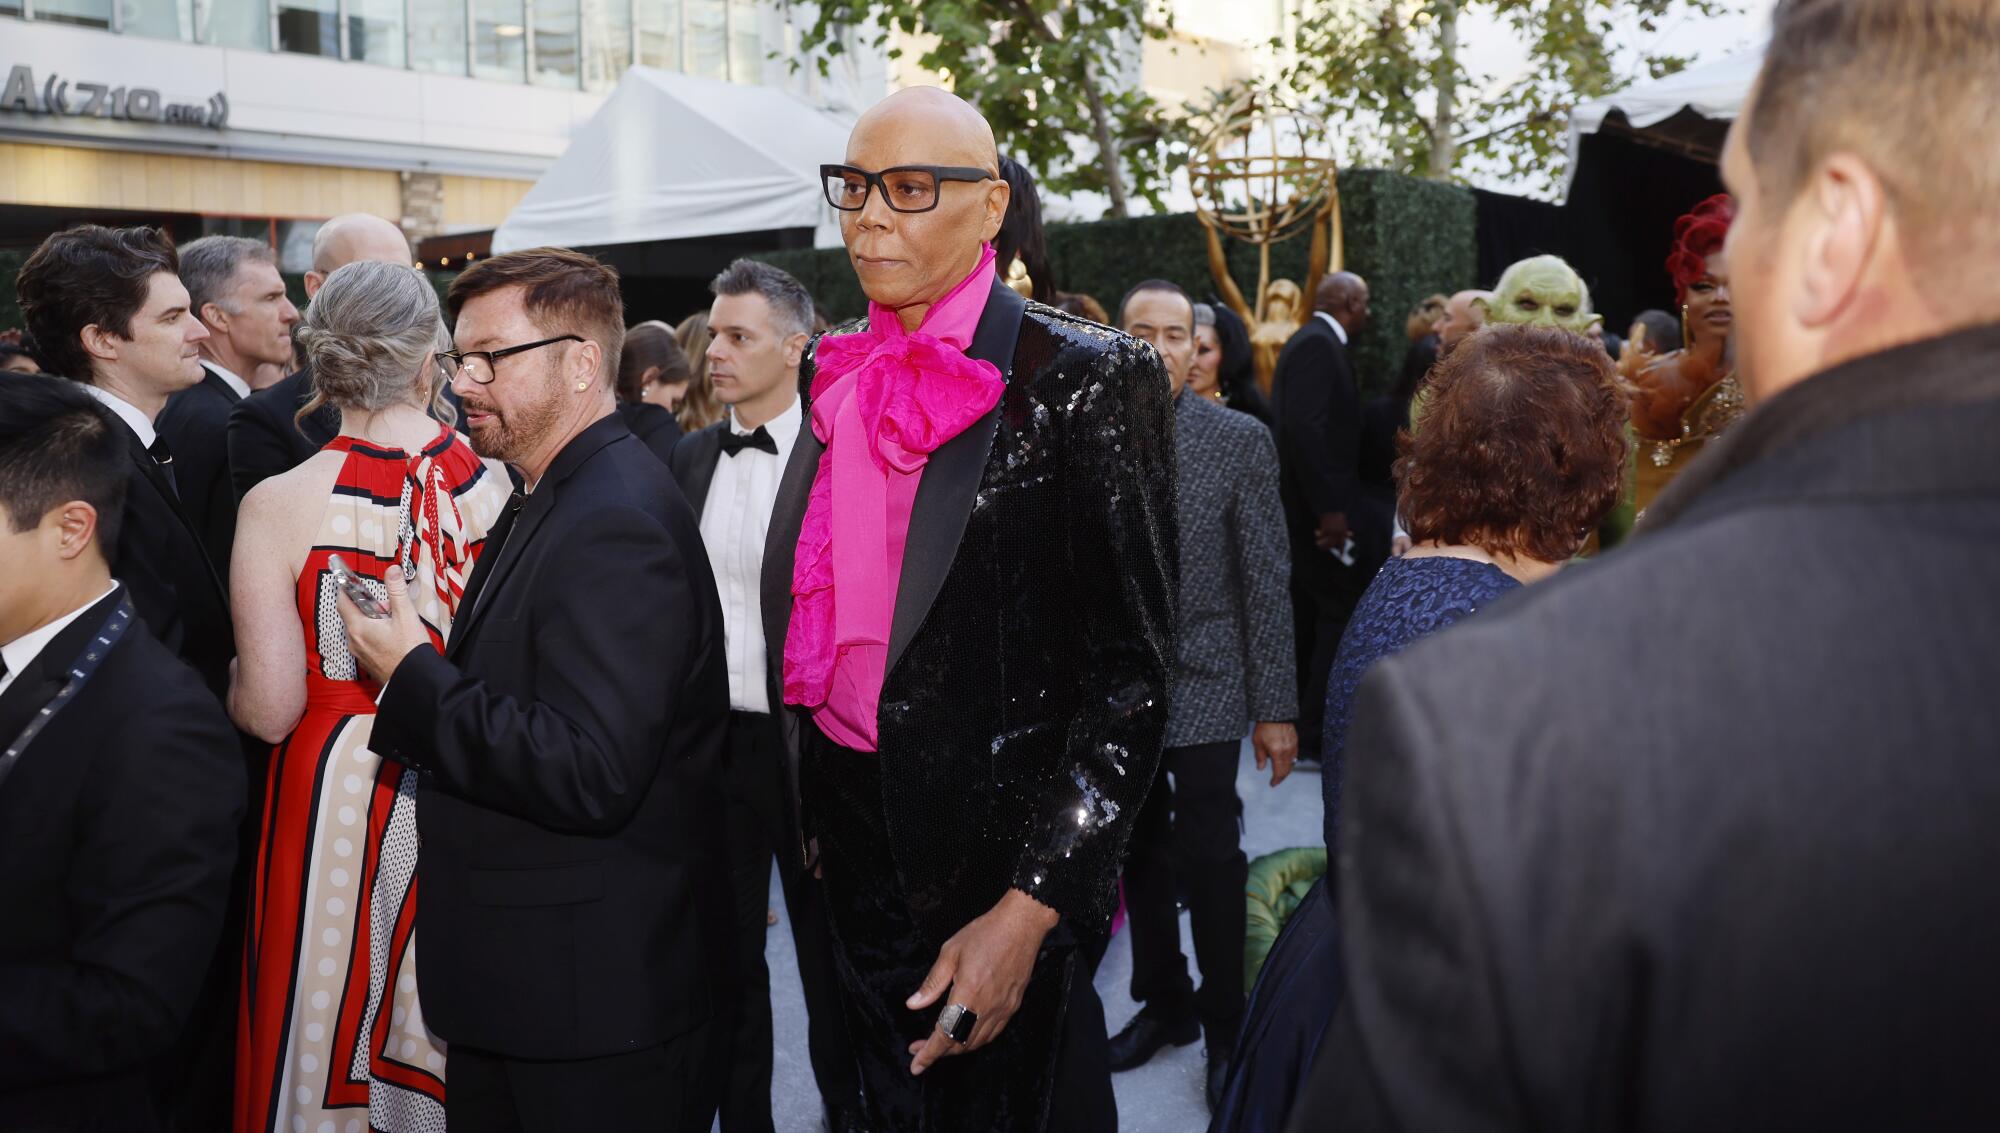 RuPaul arriving at the 75th Primetime Emmy Awards.